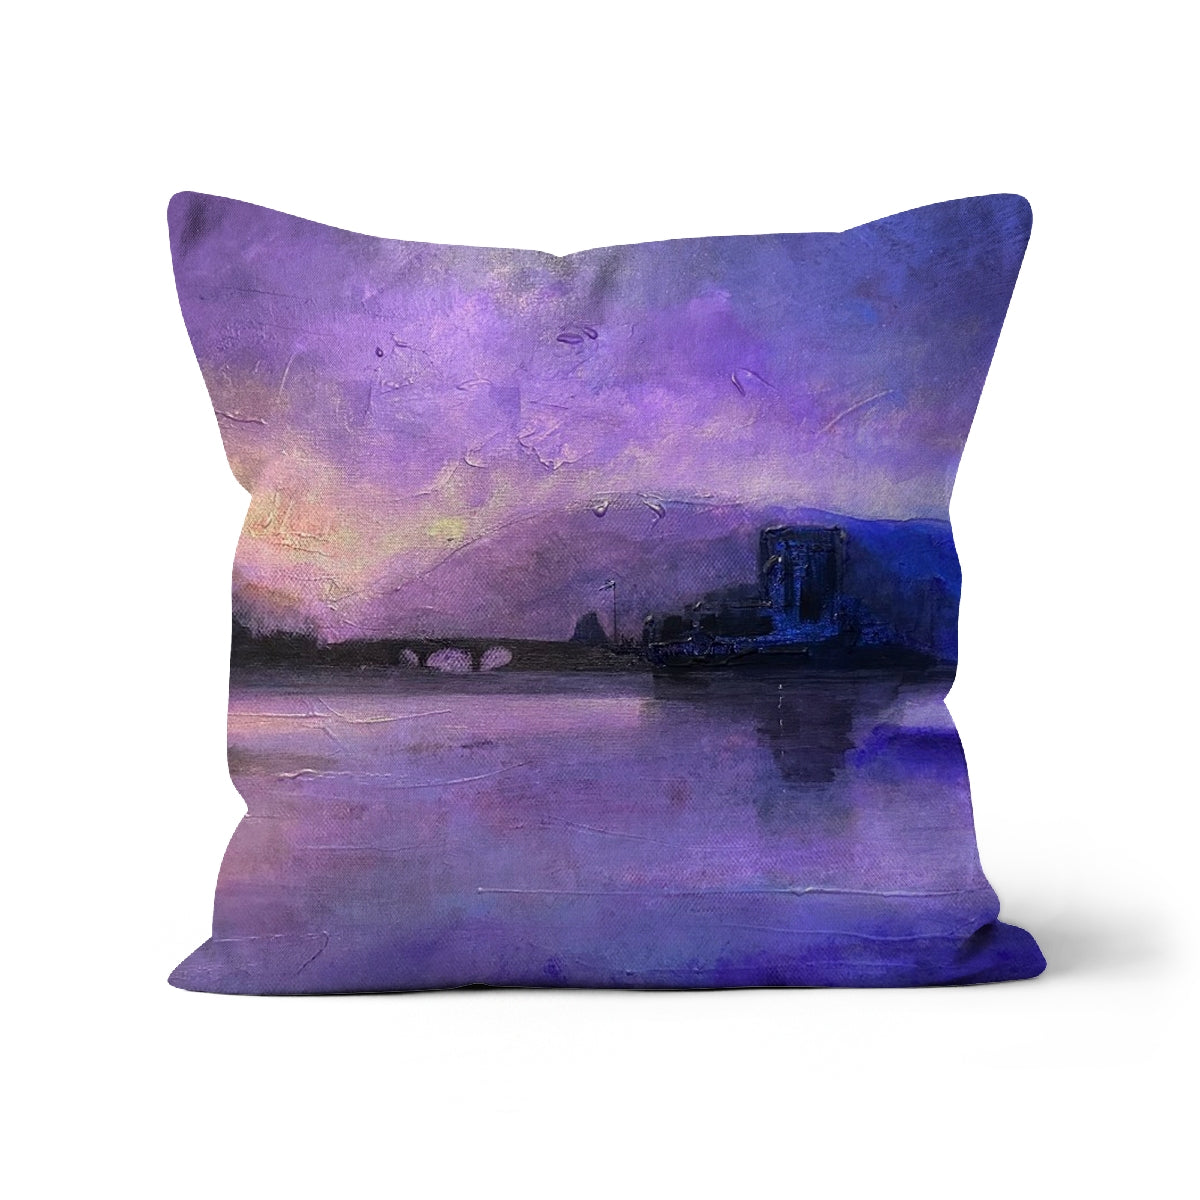 Eilean Donan Castle Moonset Art Gifts Cushion-Cushions-Historic & Iconic Scotland Art Gallery-Linen-18"x18"-Paintings, Prints, Homeware, Art Gifts From Scotland By Scottish Artist Kevin Hunter